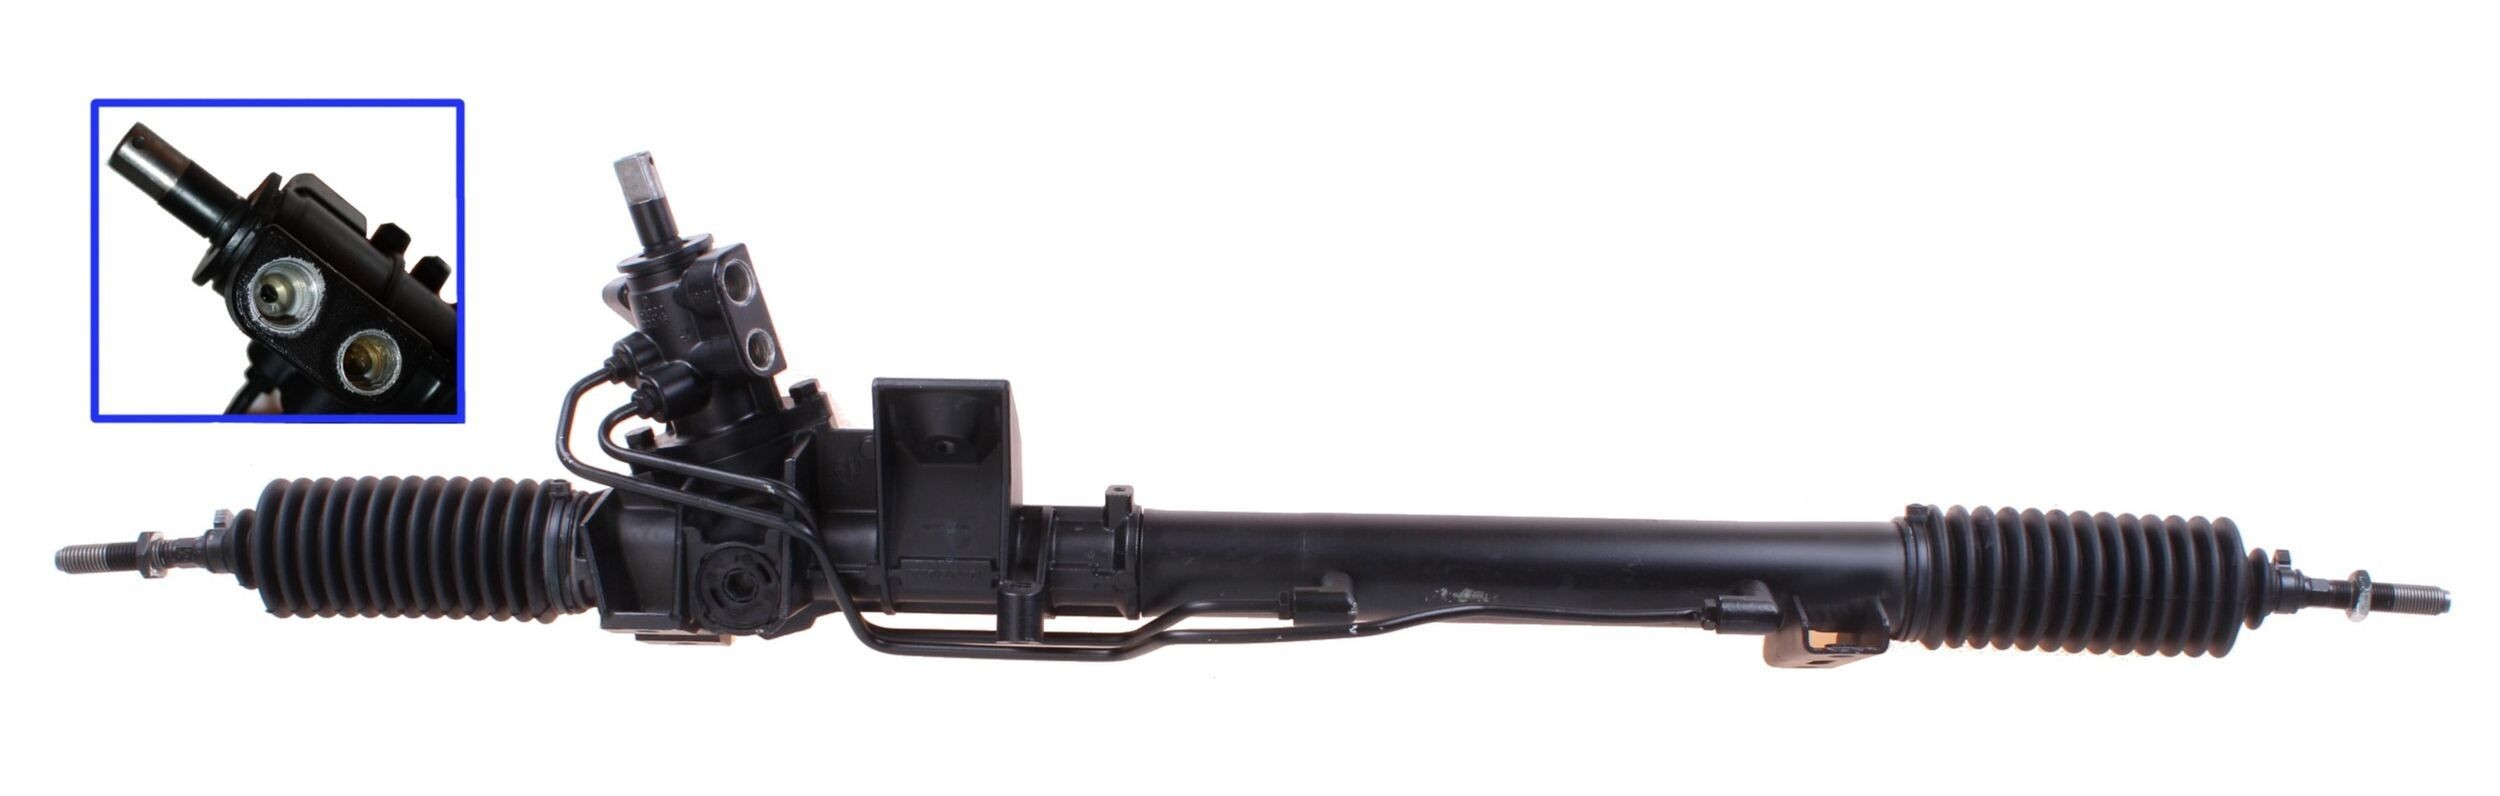 ELSTOCK 11-0397 Steering rack Hydraulic, for vehicles without servotronic steering, for left-hand drive vehicles